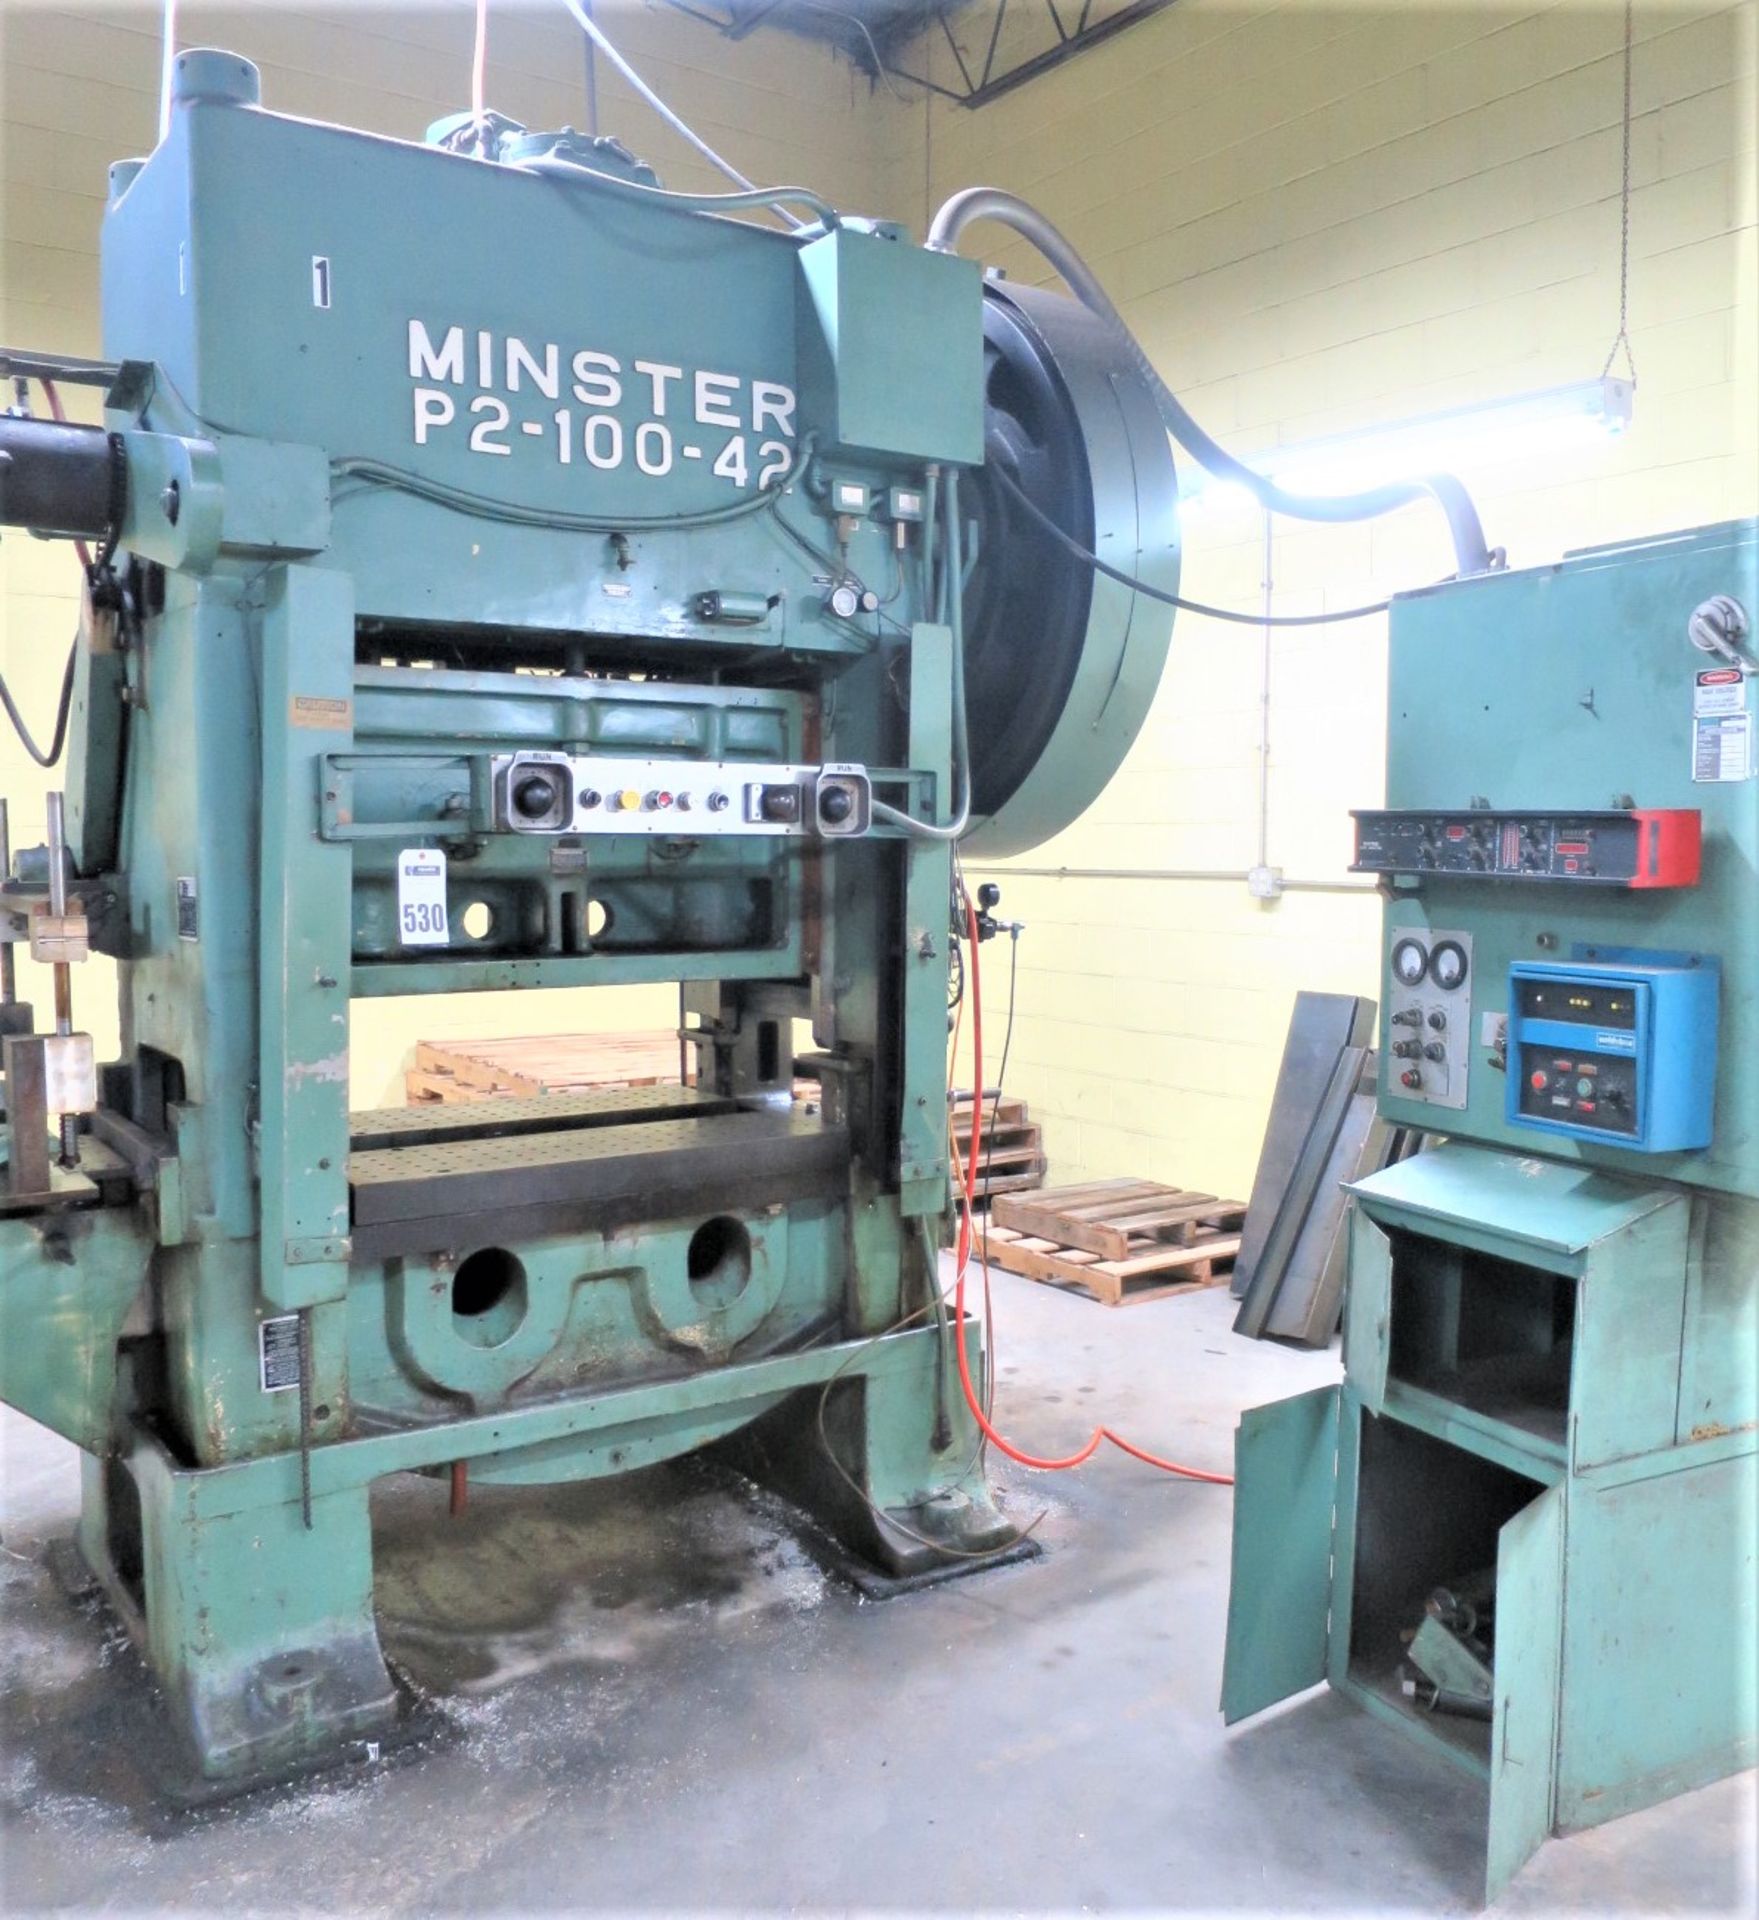 Minster 100 Ton Variable Speed Straight Side Production Press, P2-100-42, Sn P2-100-10818 3"